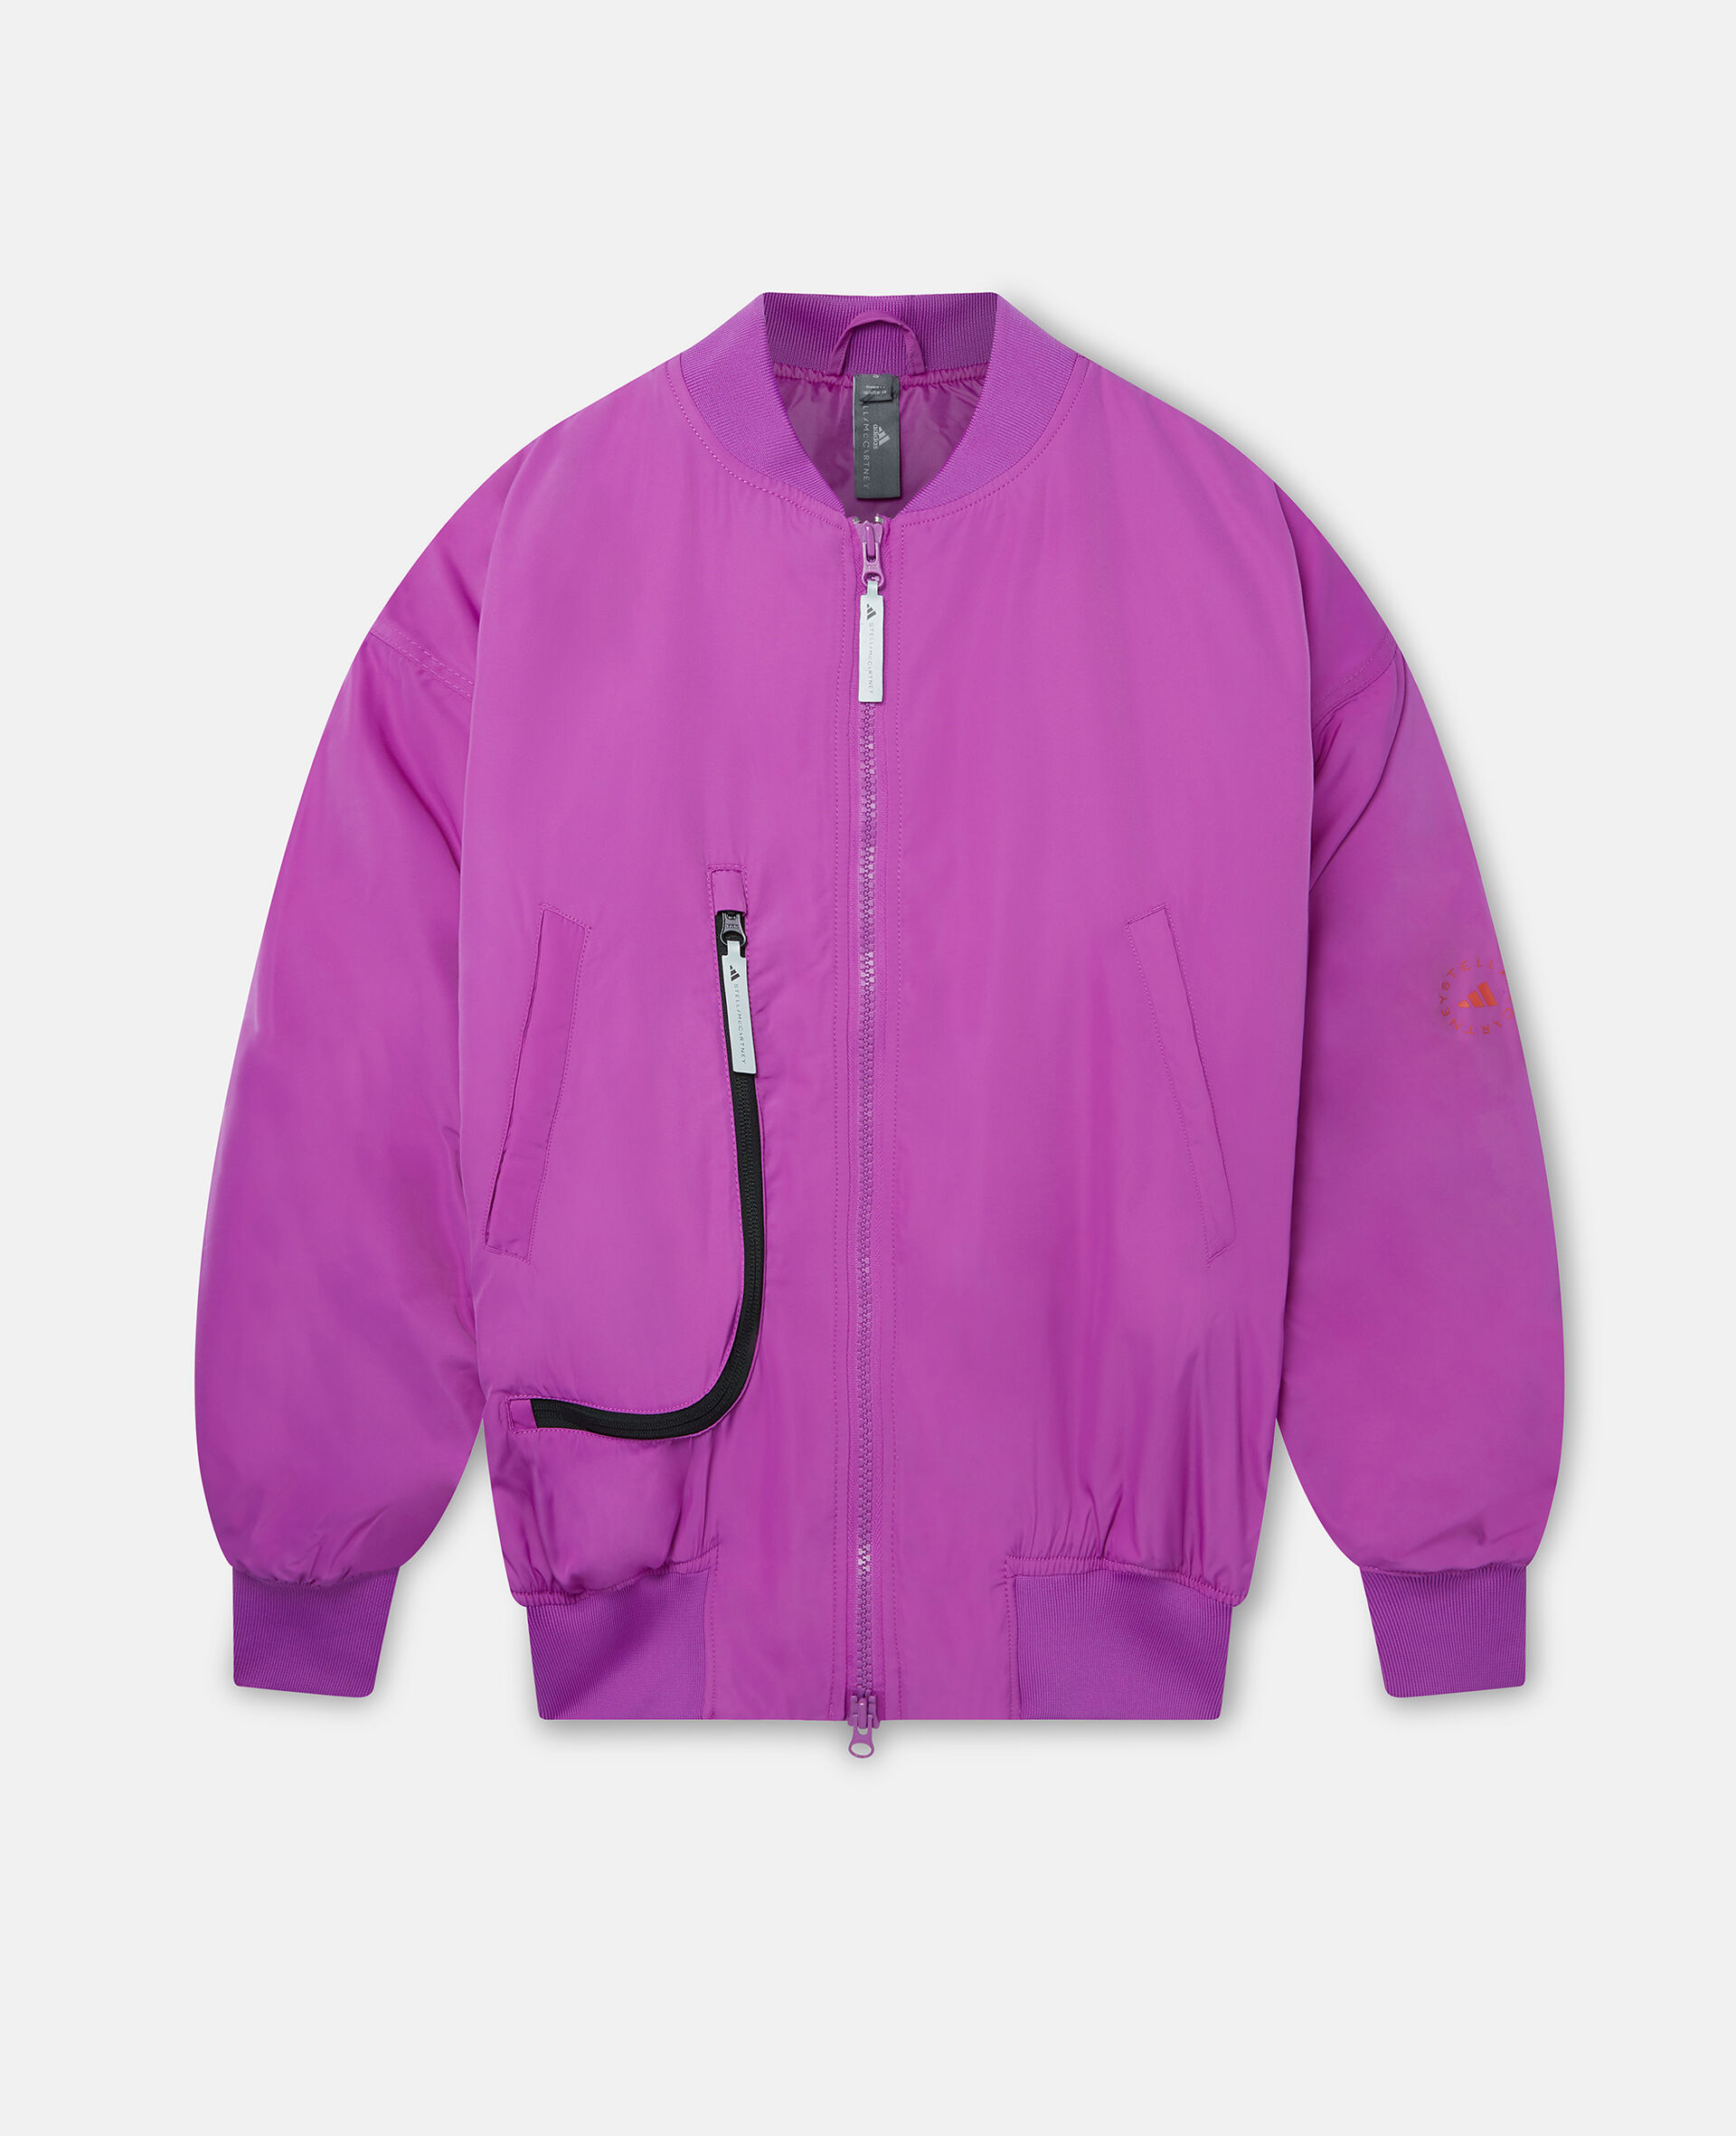 TrueCasuals Woven Bomber Jacket-Purple-large image number 0